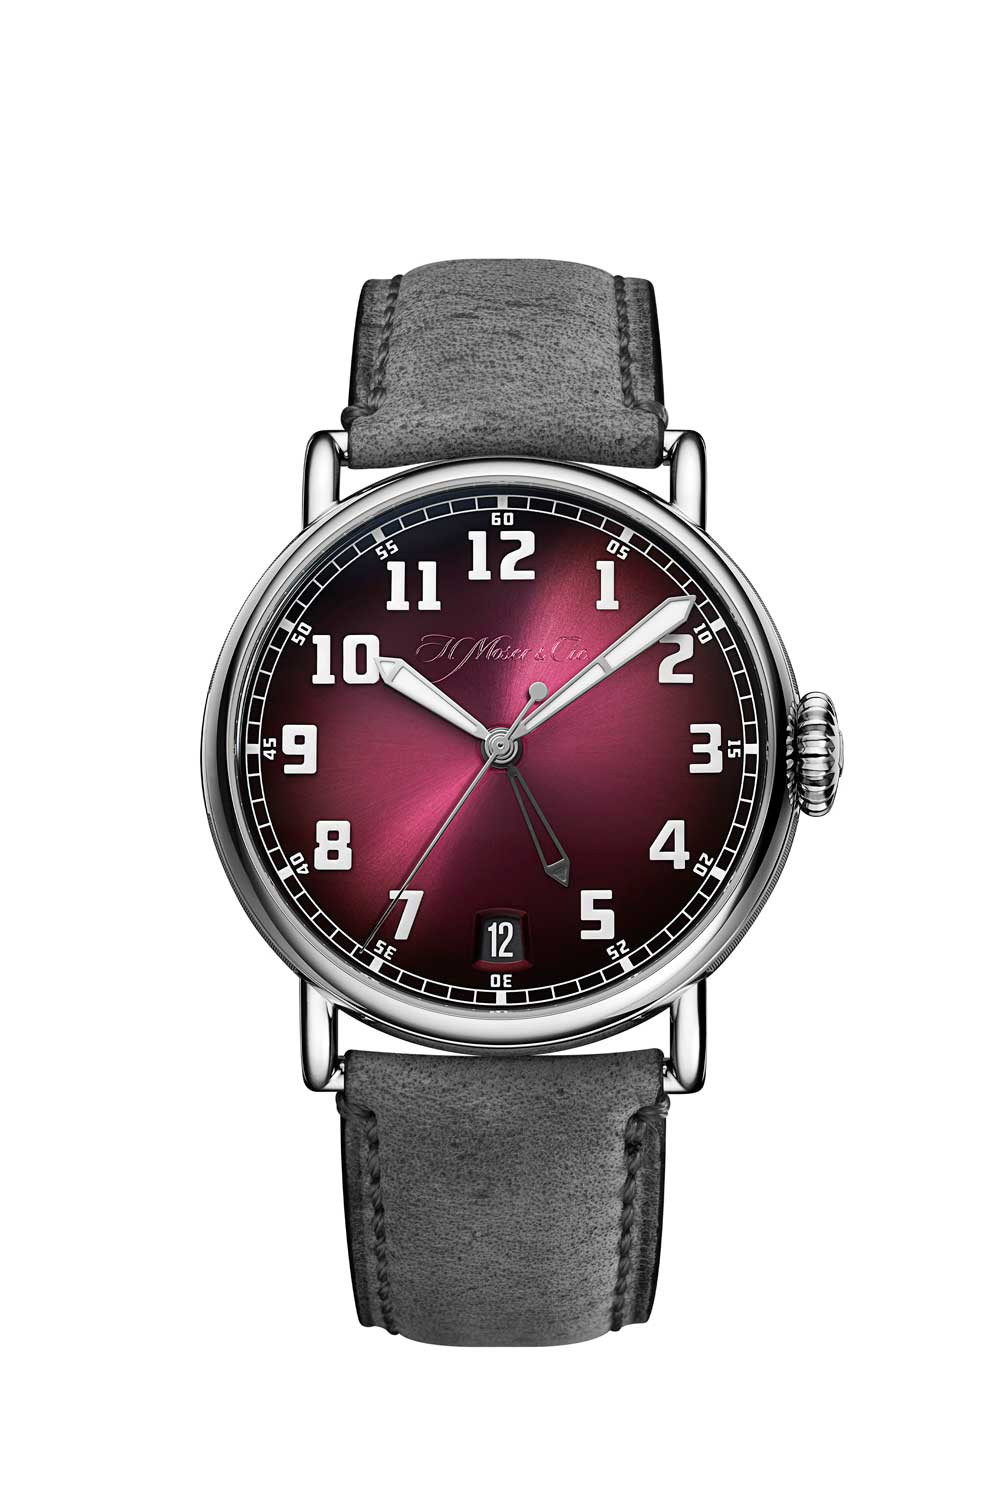 H. Moser & Cie. Dual Time Heritage Model featuring a burgundy fumé dial with sunburst pattern